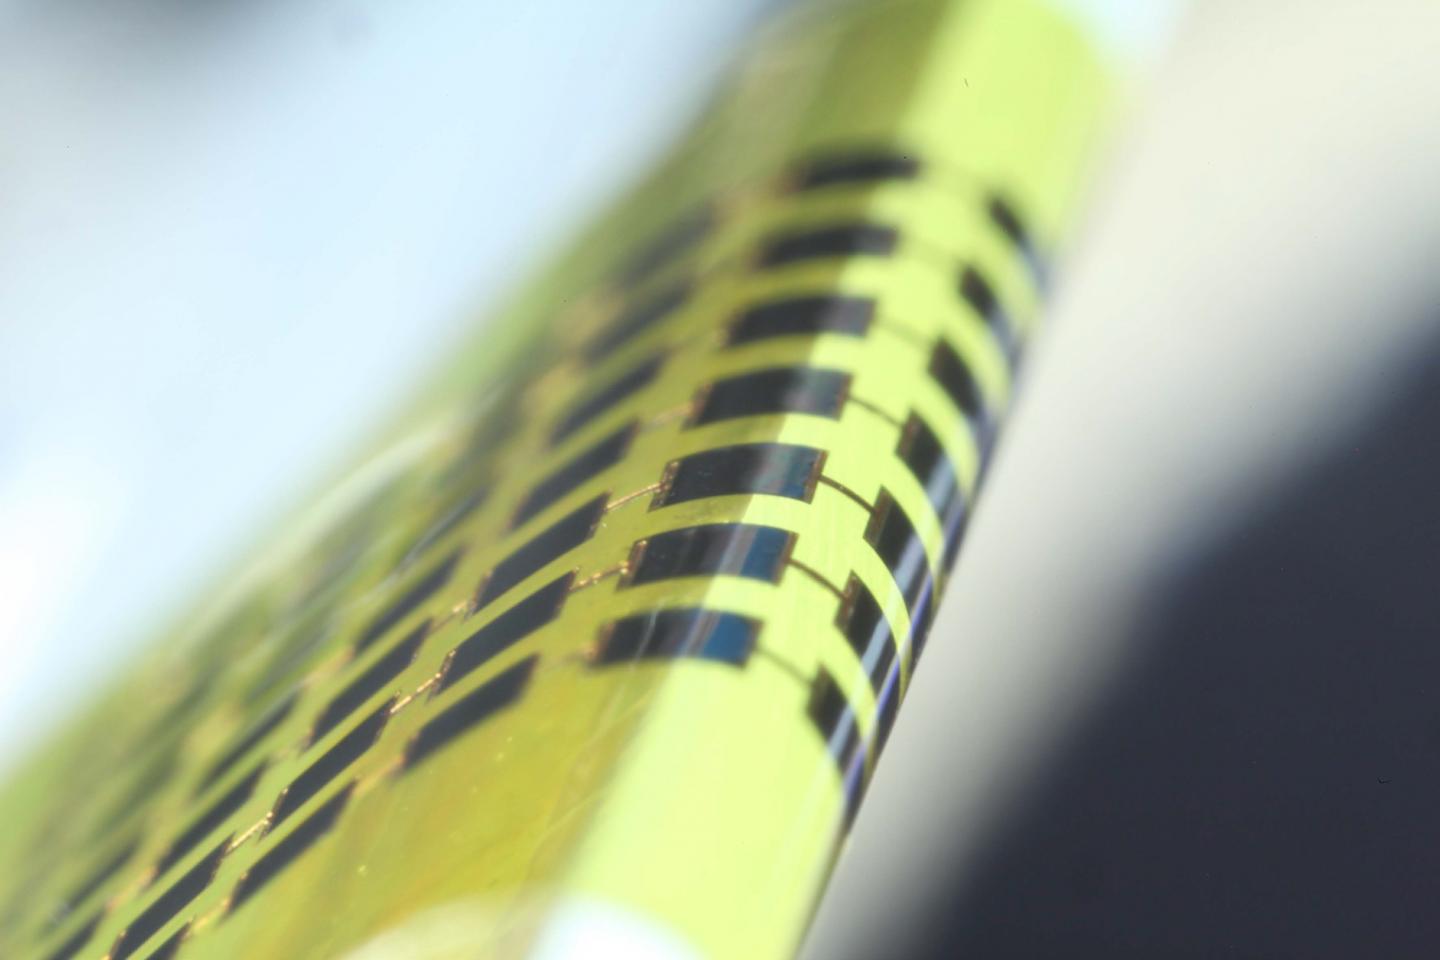 Caption: Ultra-thin solar cells are flexible enough to bend around small objects, such as the 1mm-thick edge of a glass slide, as shown here. Credit: Juho Kim, et al/ APL